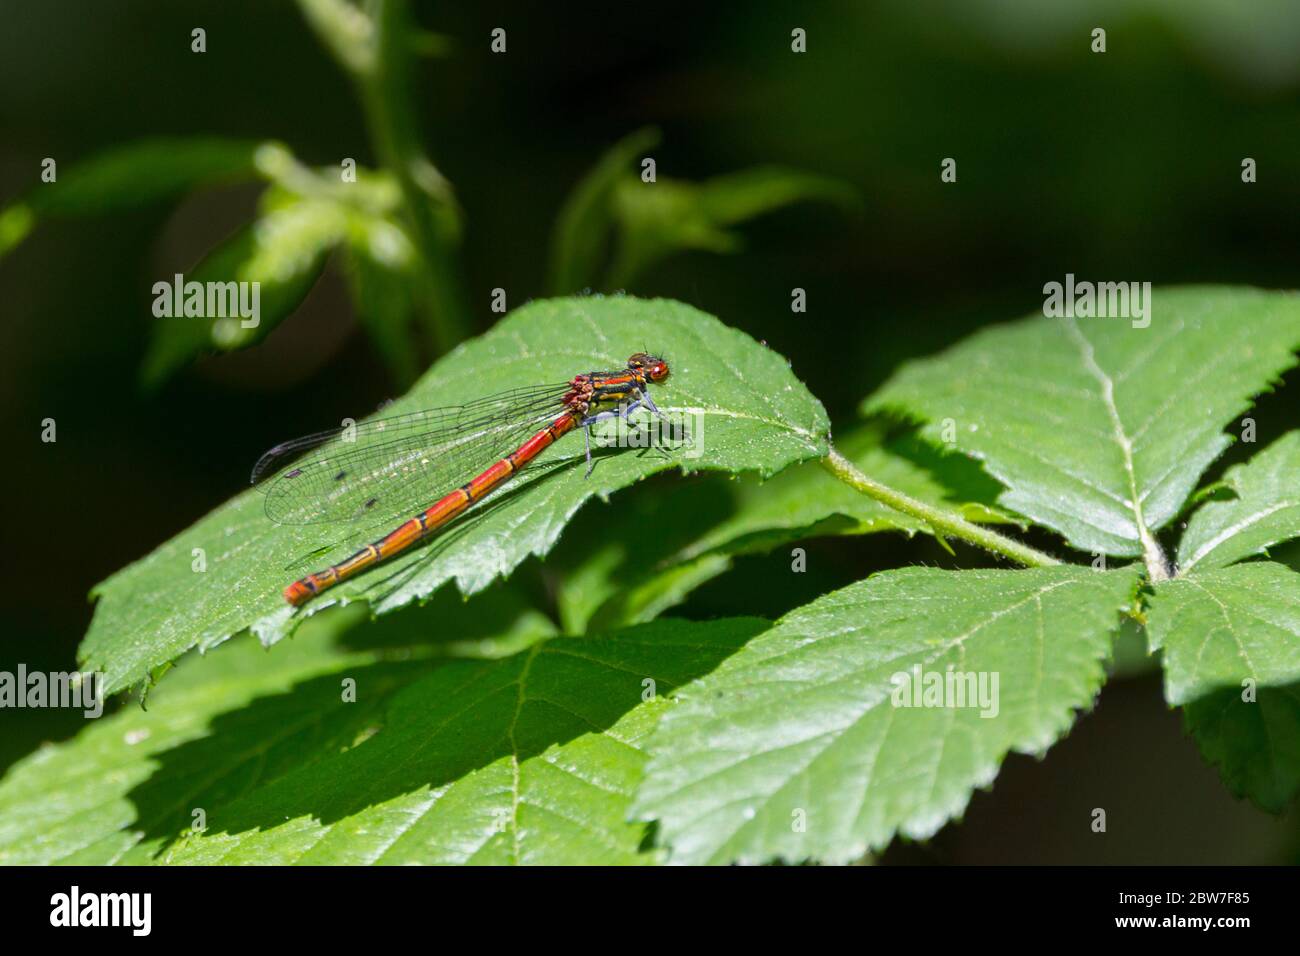 Large red damselfly Pyrrhosoma nymphula bright red long slender body marked with black has red compound eyes and dark dots on each of four wing tips Stock Photo